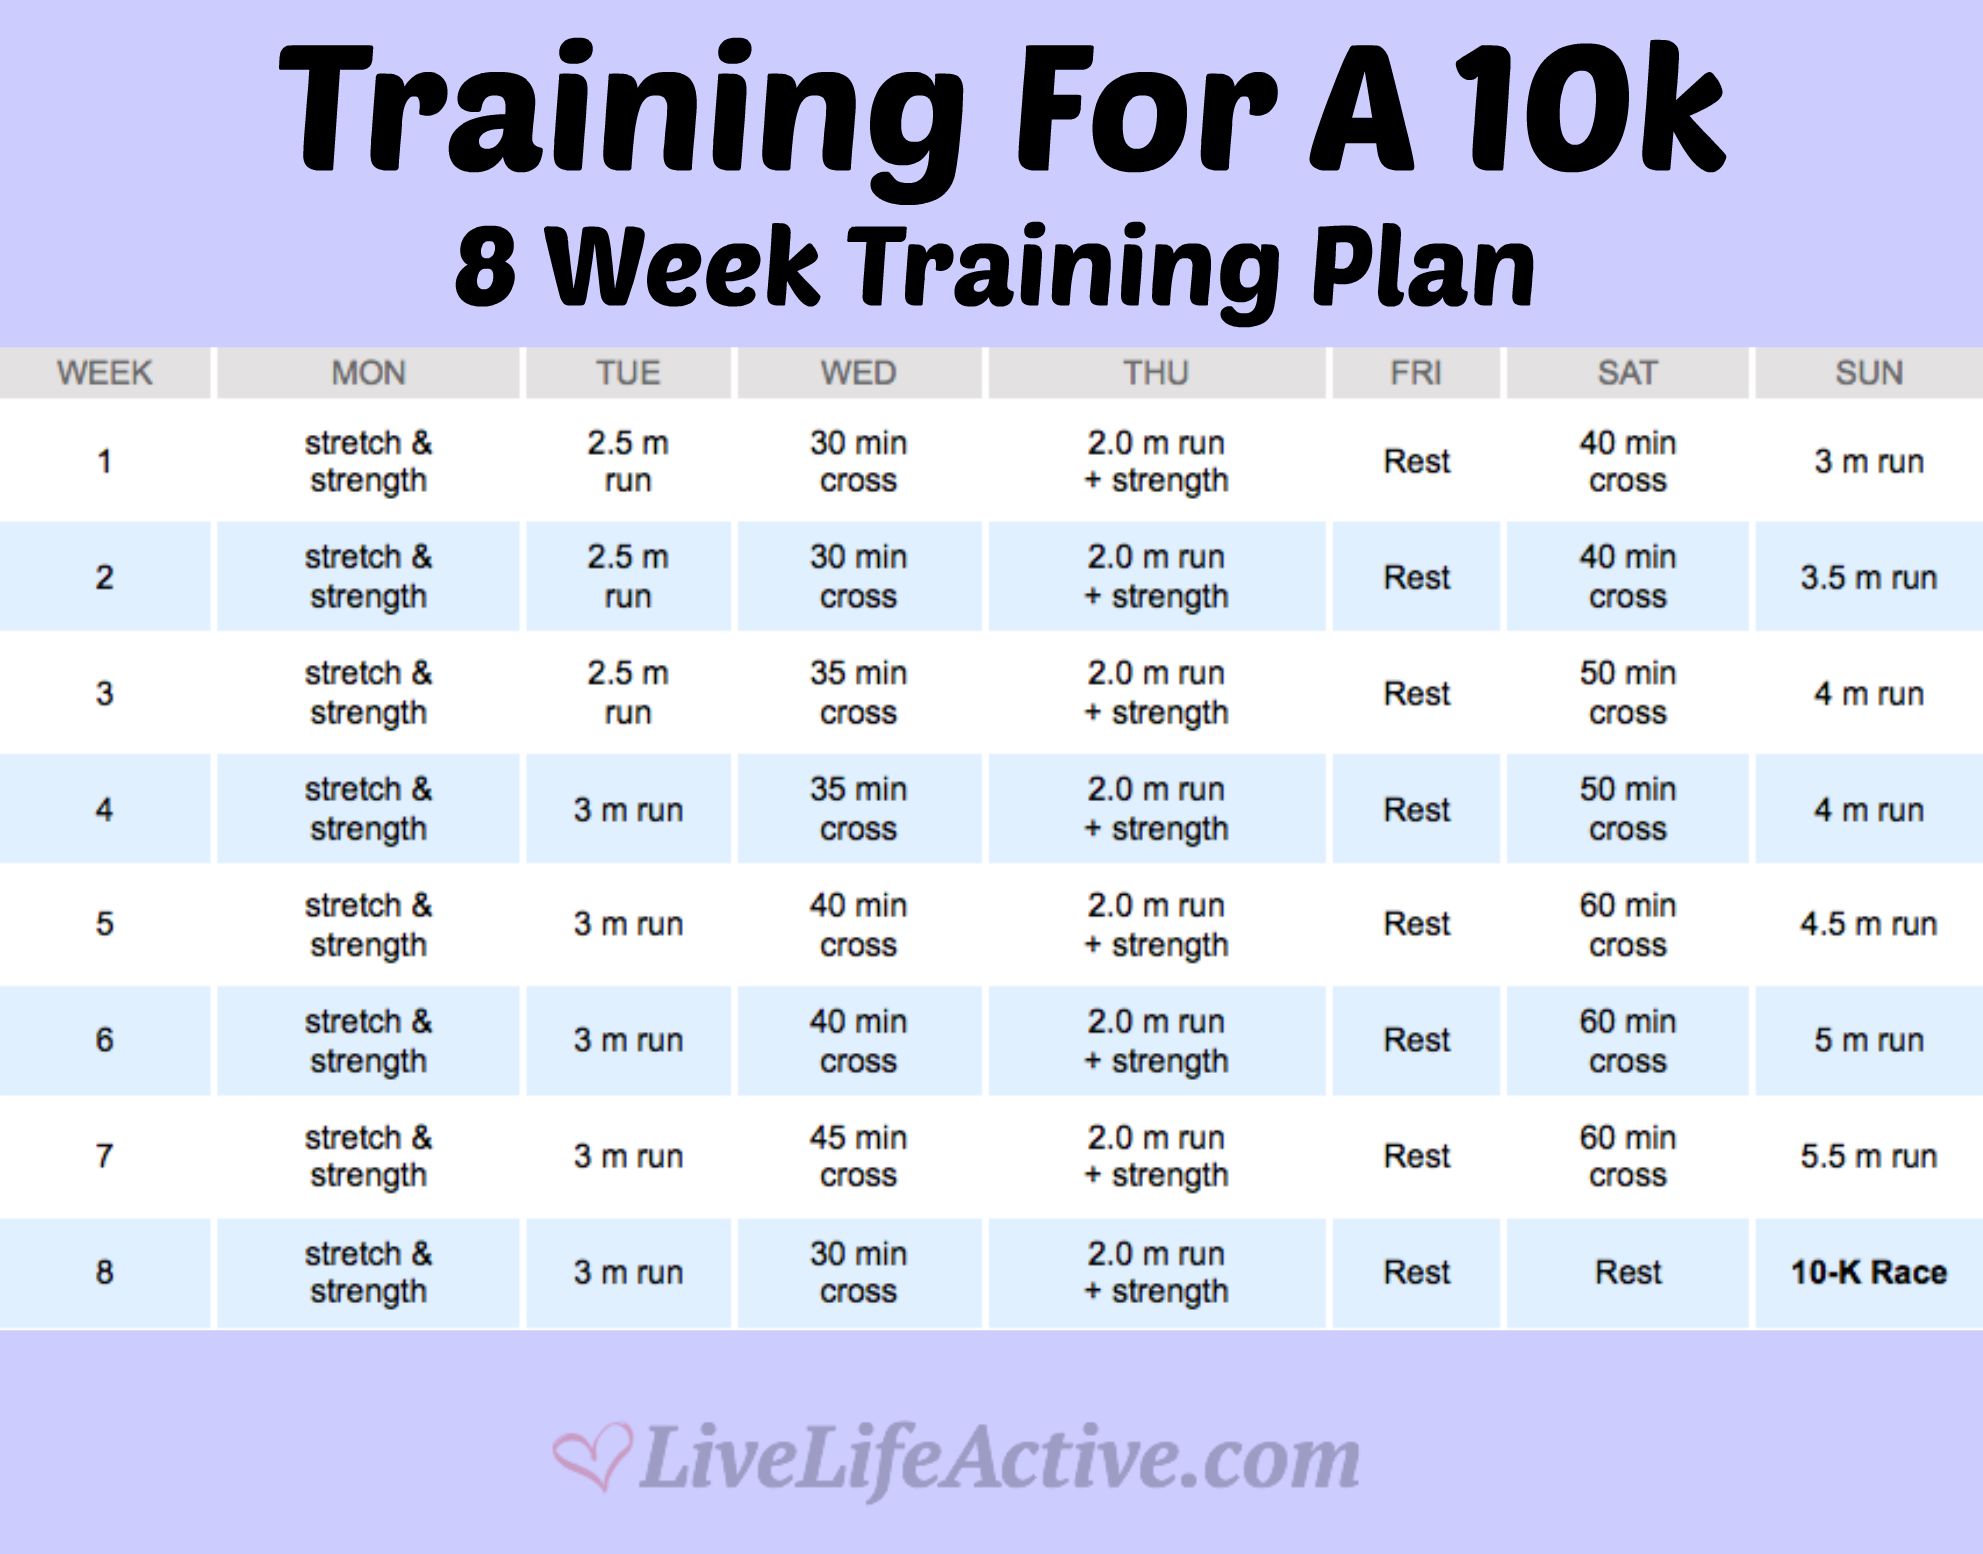 Training For A 10k